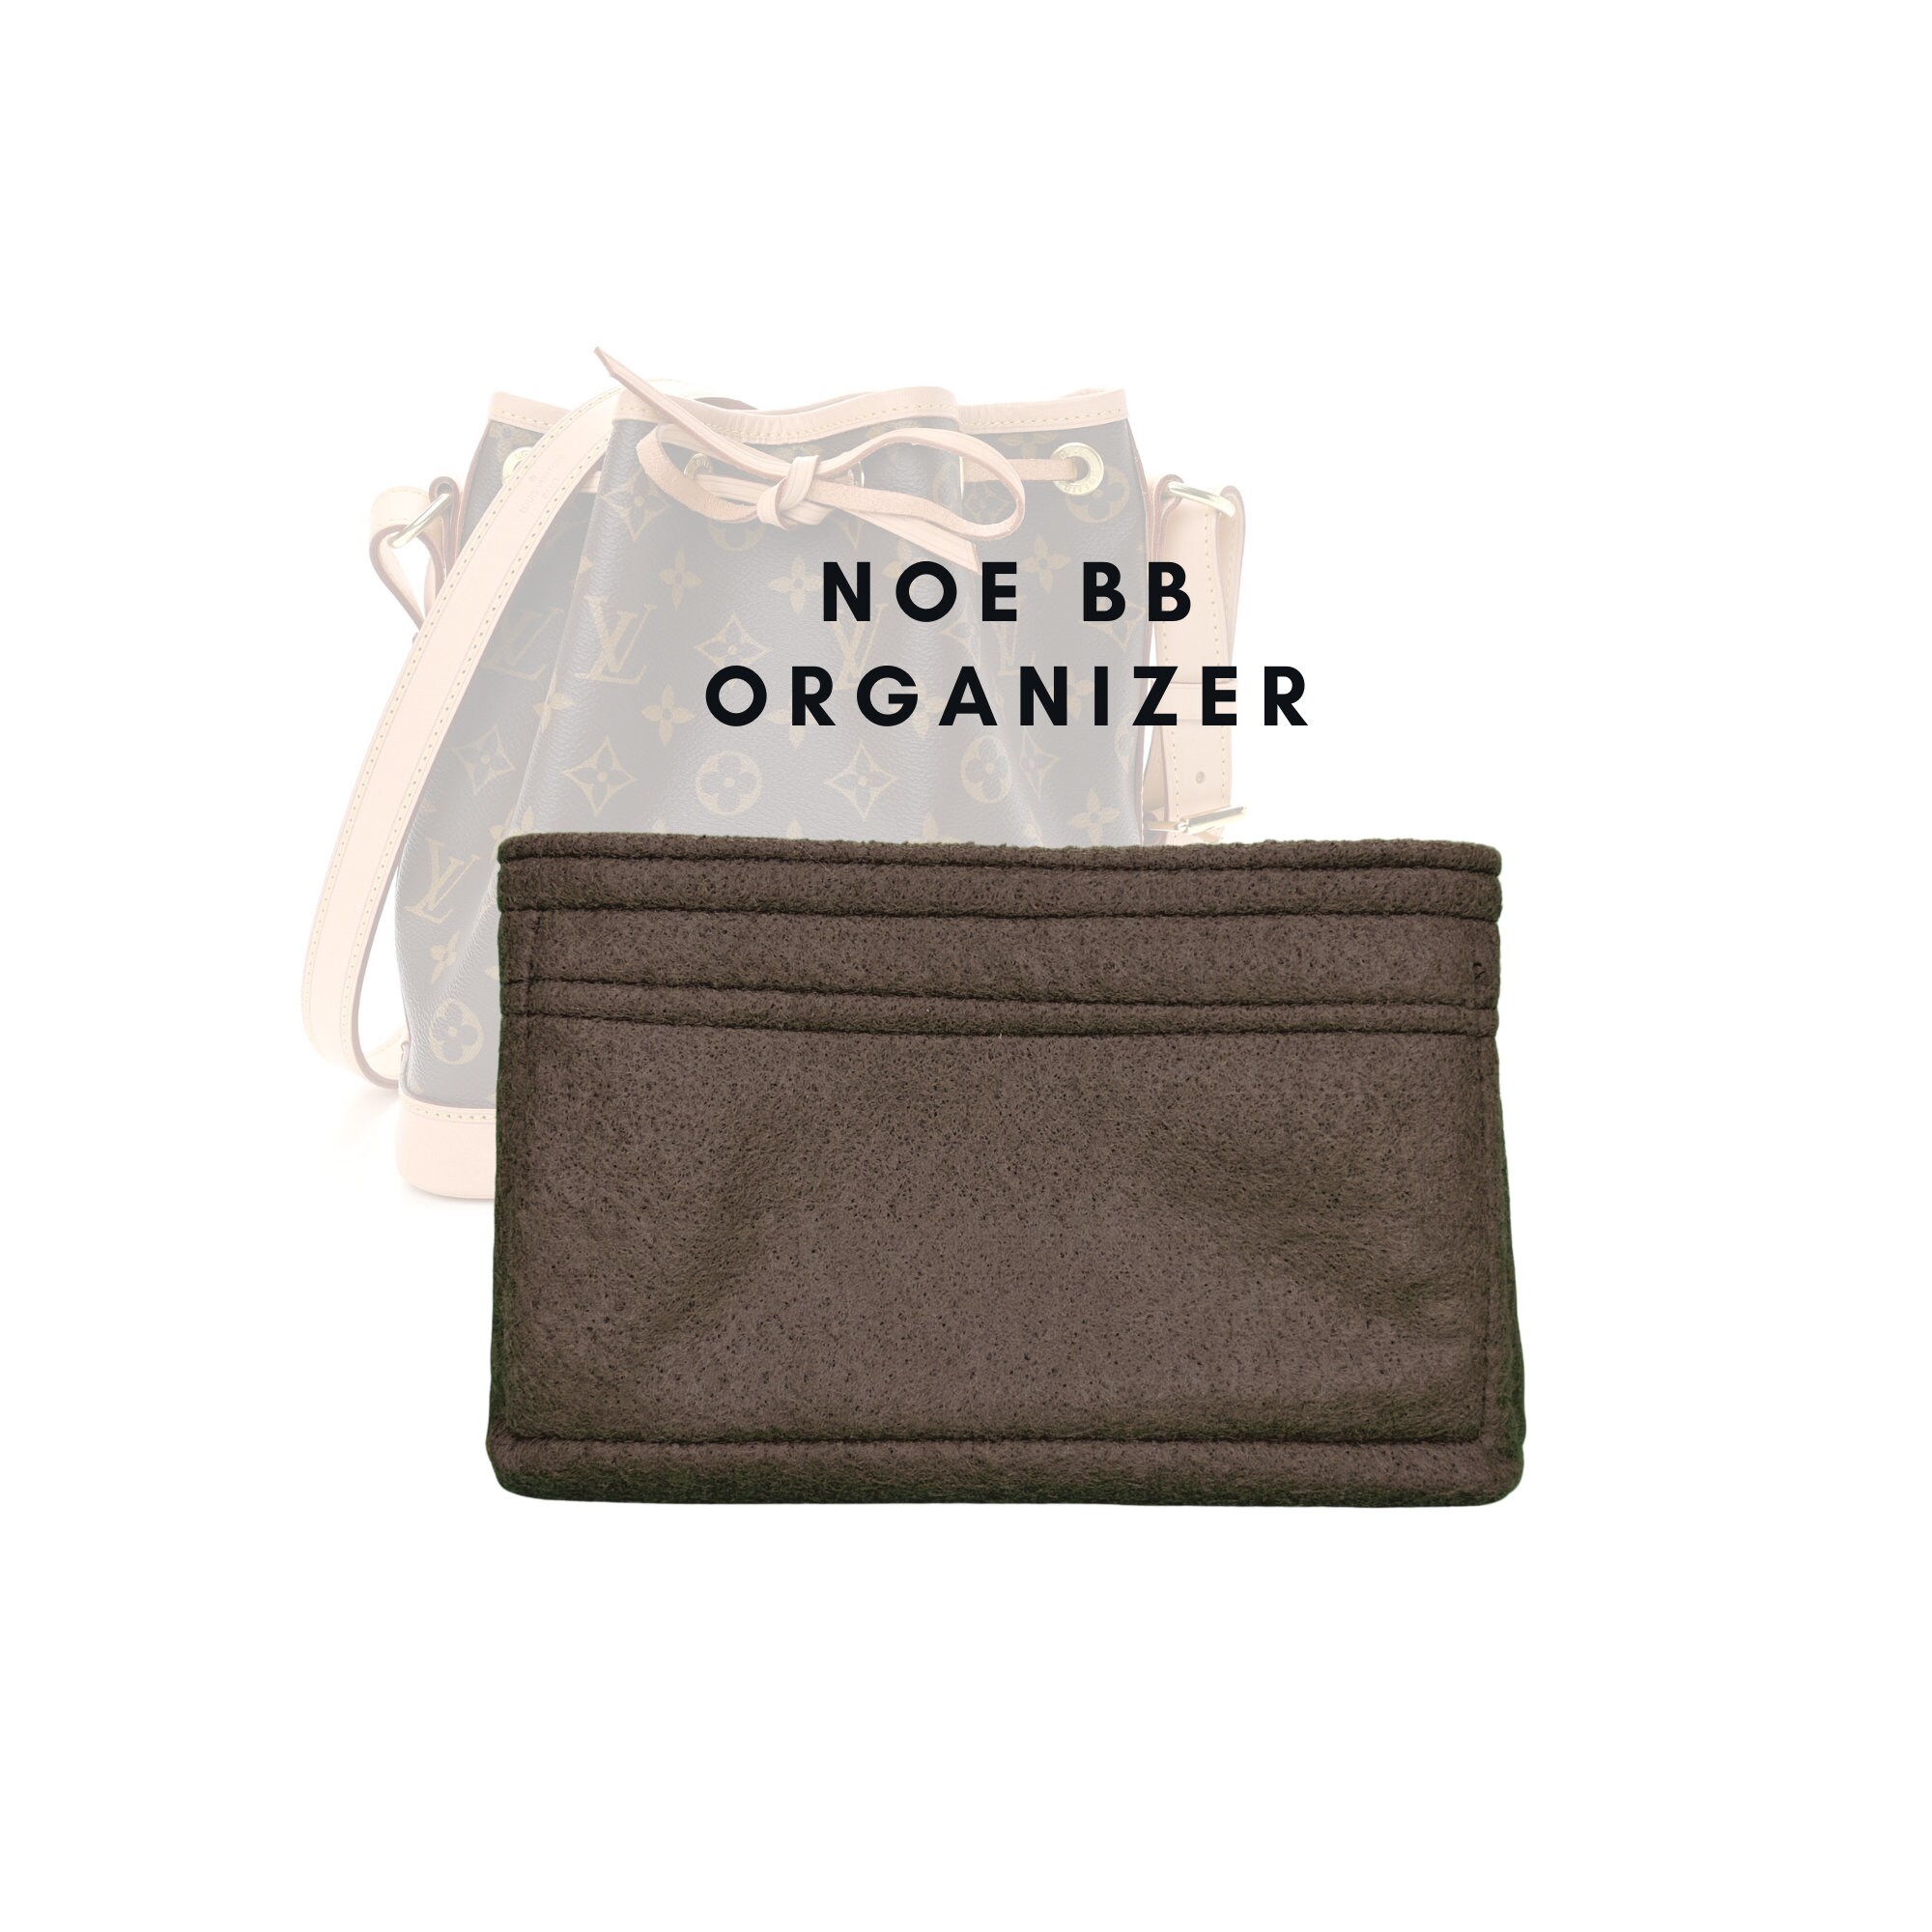 NOE BB Organizer] Felt Purse Insert with Middle Zip Pouch, Customized